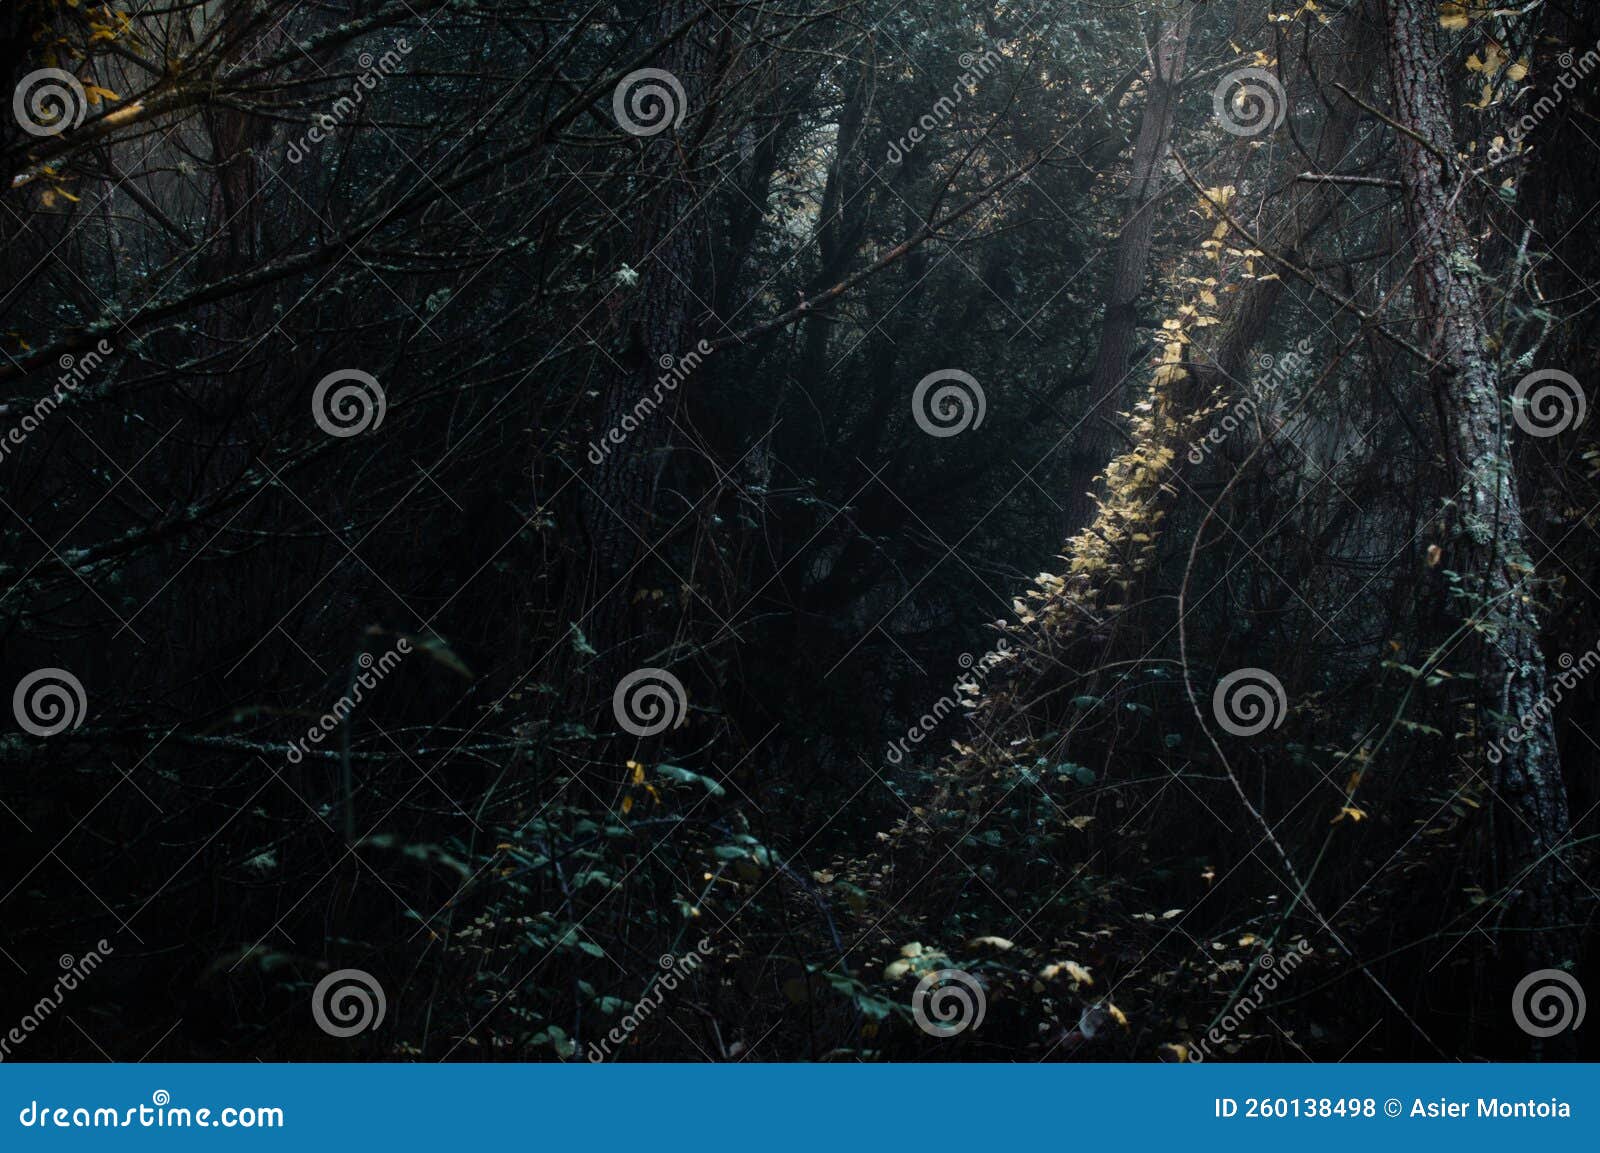 vegetation in the twilight of the interior of the forest.